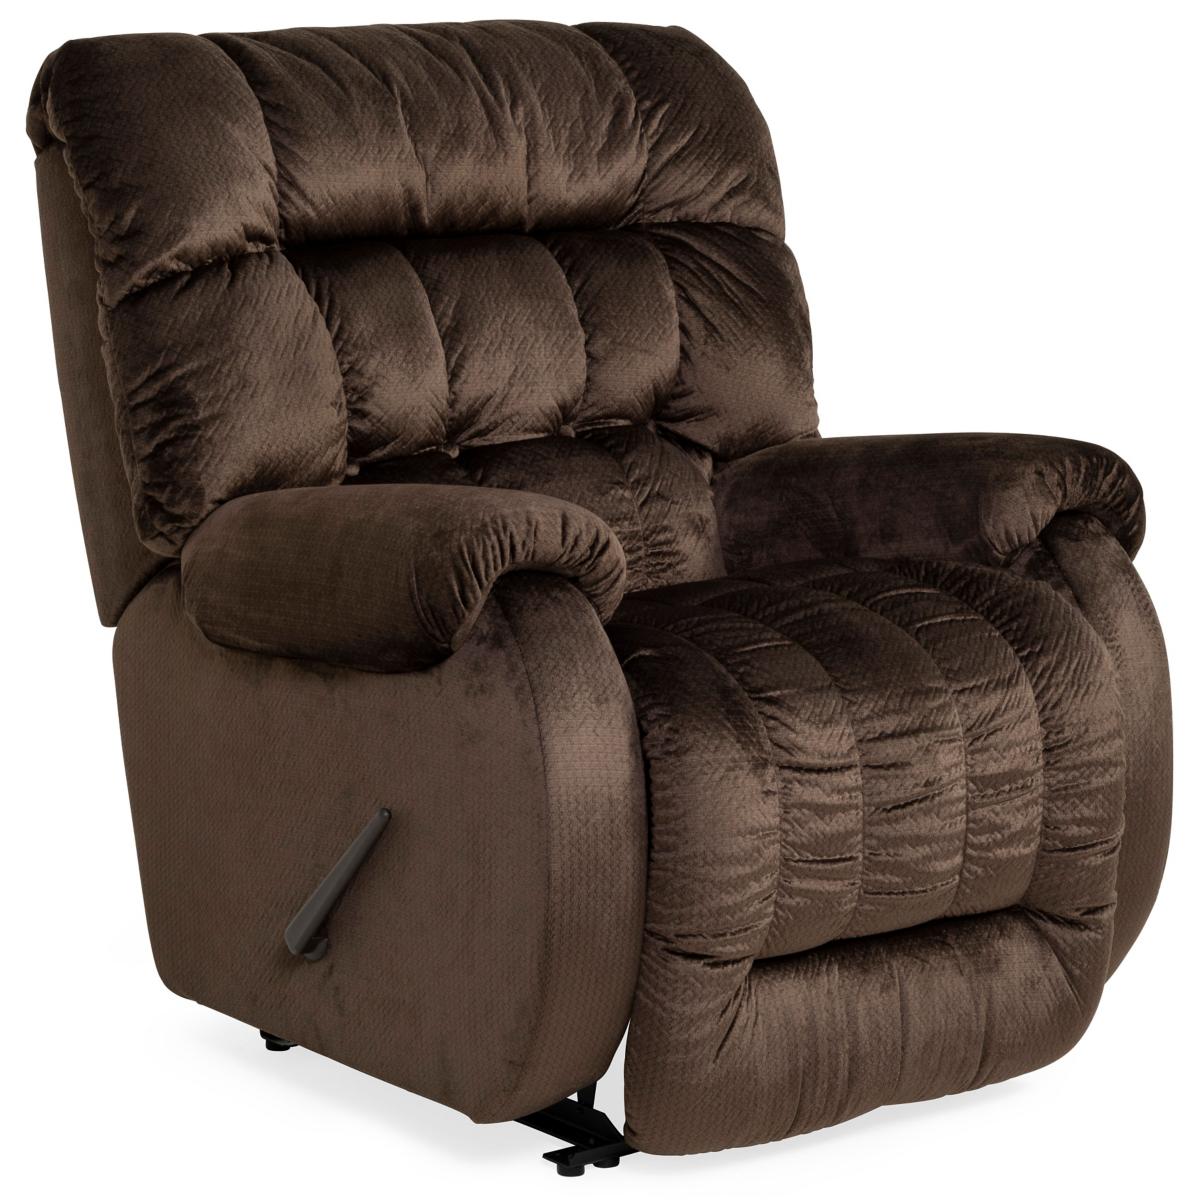 Extra-Large Brown Manual Recliner 